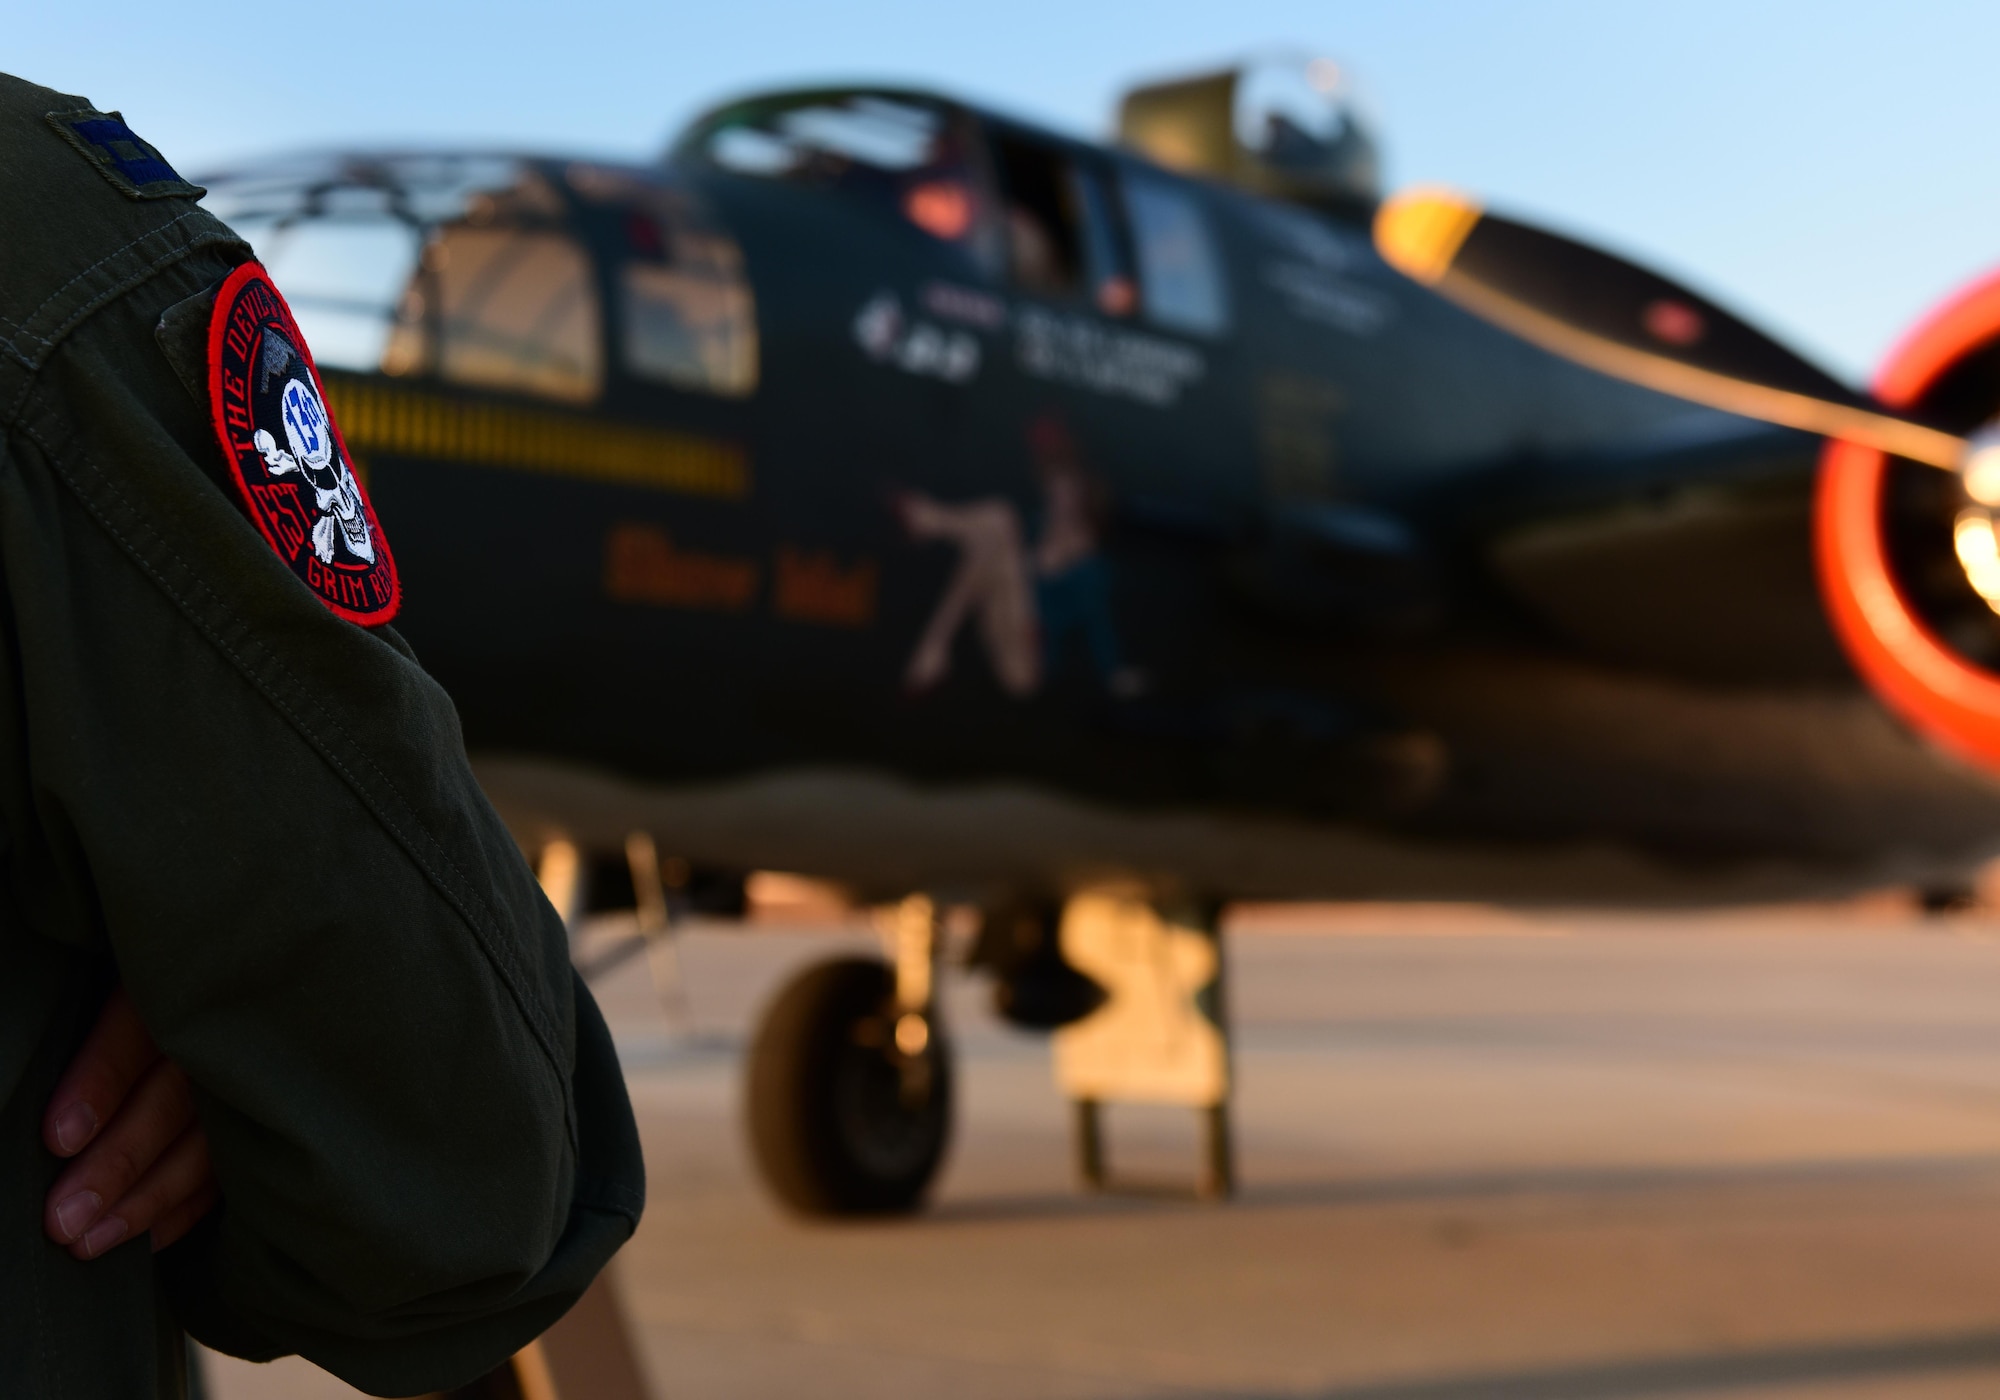 A B-2 Spirit Bomber pilot, from the 13th Bob Squadron (BS) stands in front of a North American B-25 Mitchell at Whiteman Air Force Base, Mo., June 11, 2017. The 13th BS has participated in every war since World War I and celebrated 100 years of service on June 14, 2017. (U.S. Air Force photo by Tech. Sgt. Tyler Alexander)